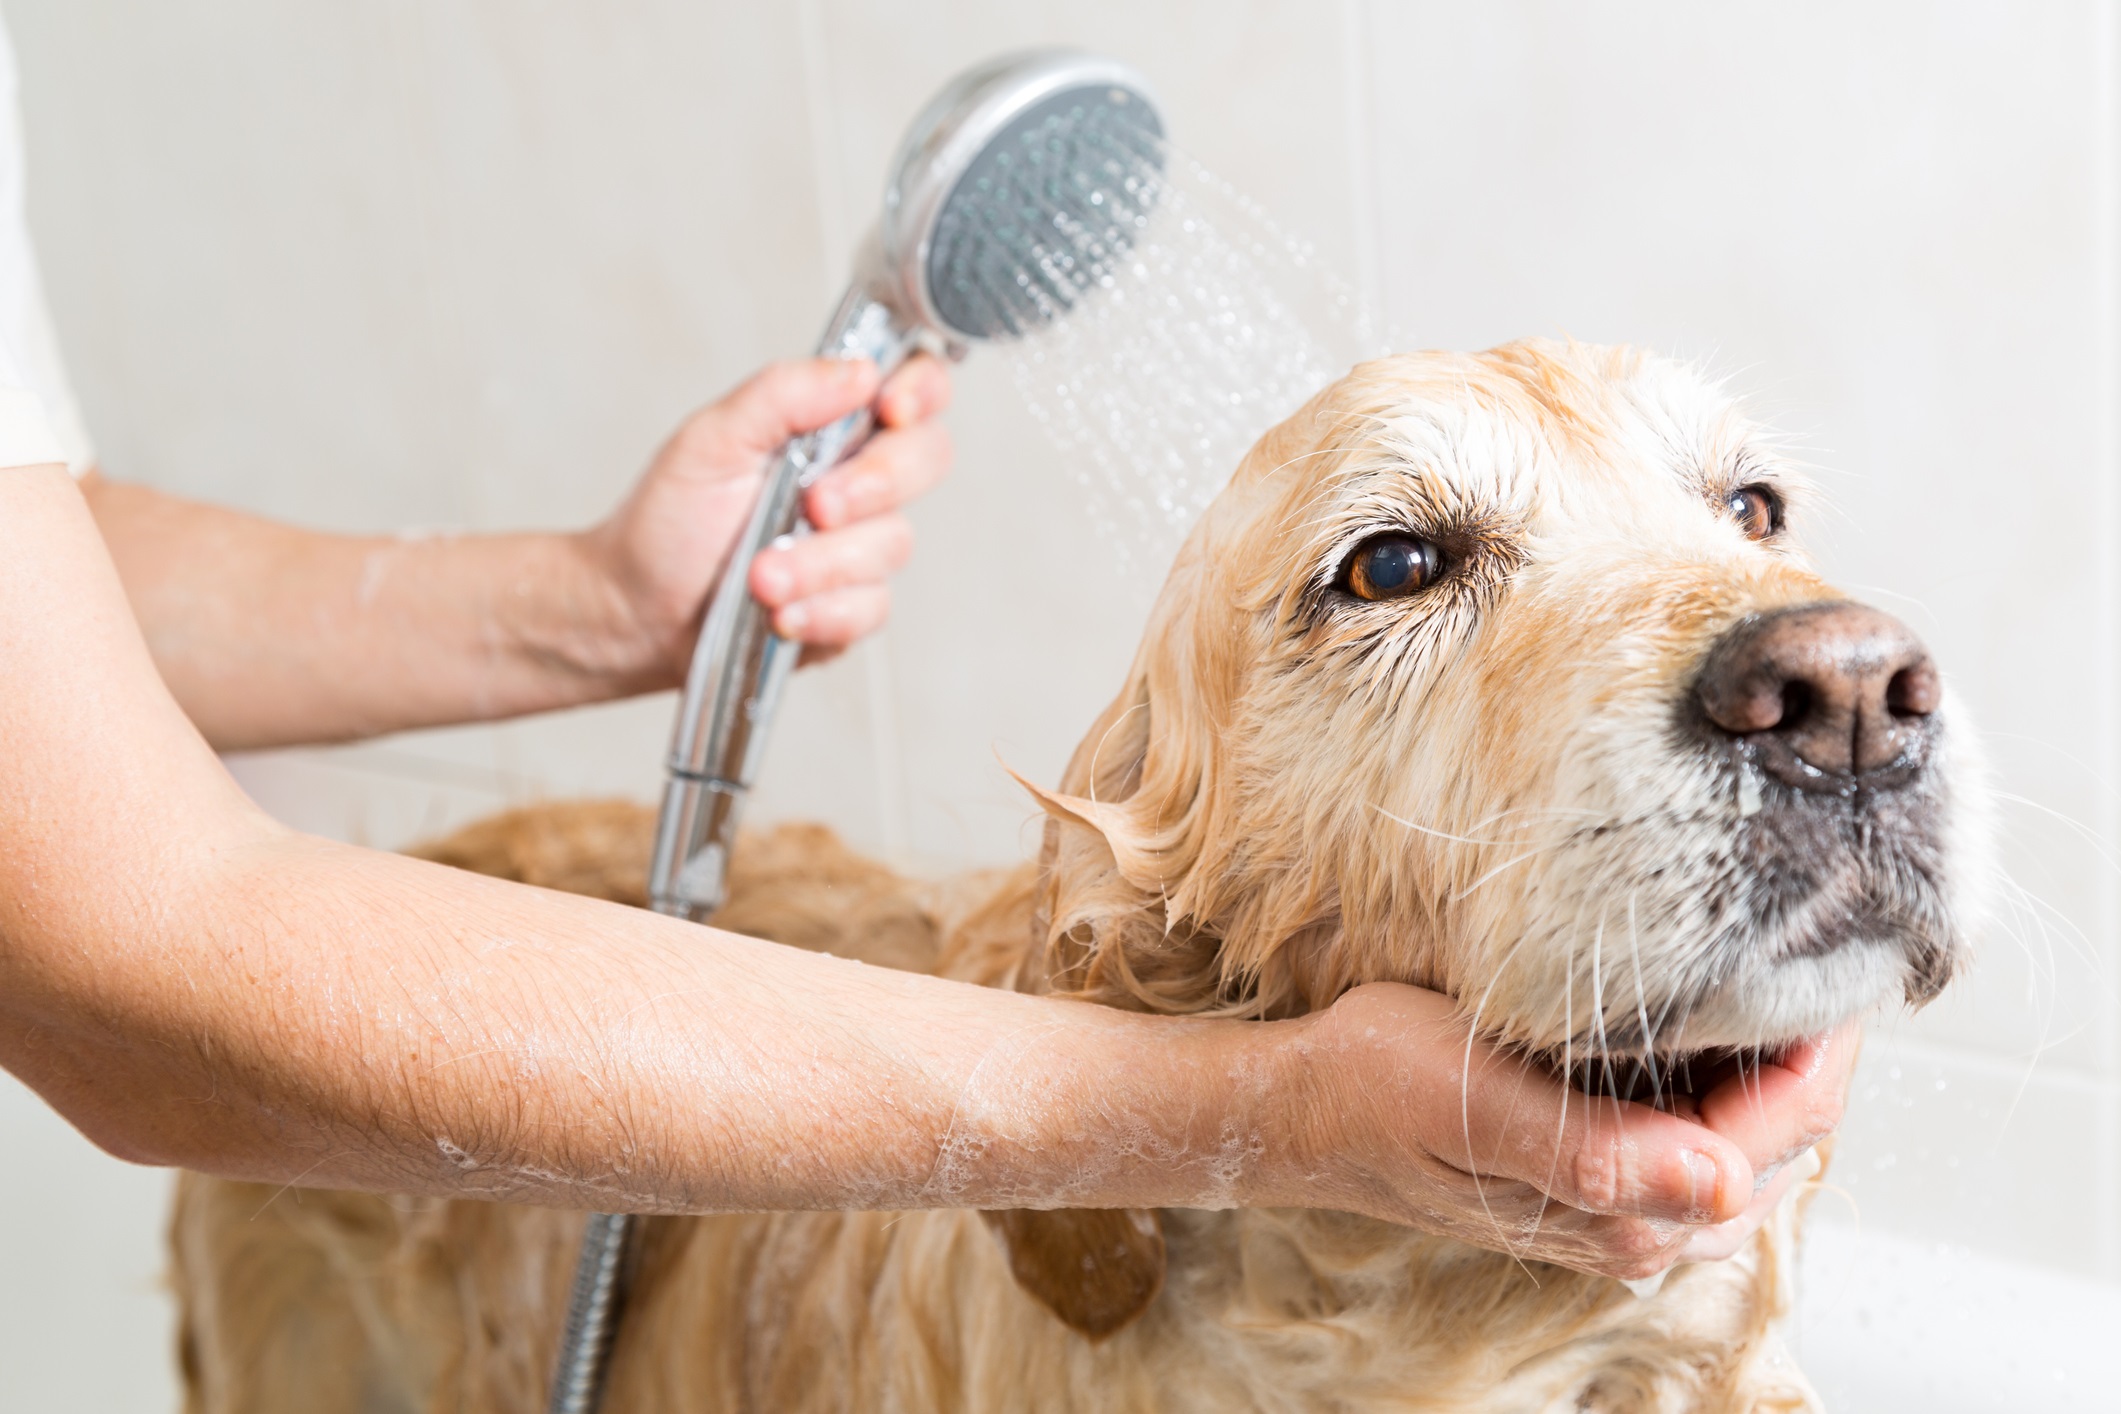 A Golden retriever receives a gentle rinse in the bath for "How Often Should Your Dog Be Bathed" blog.